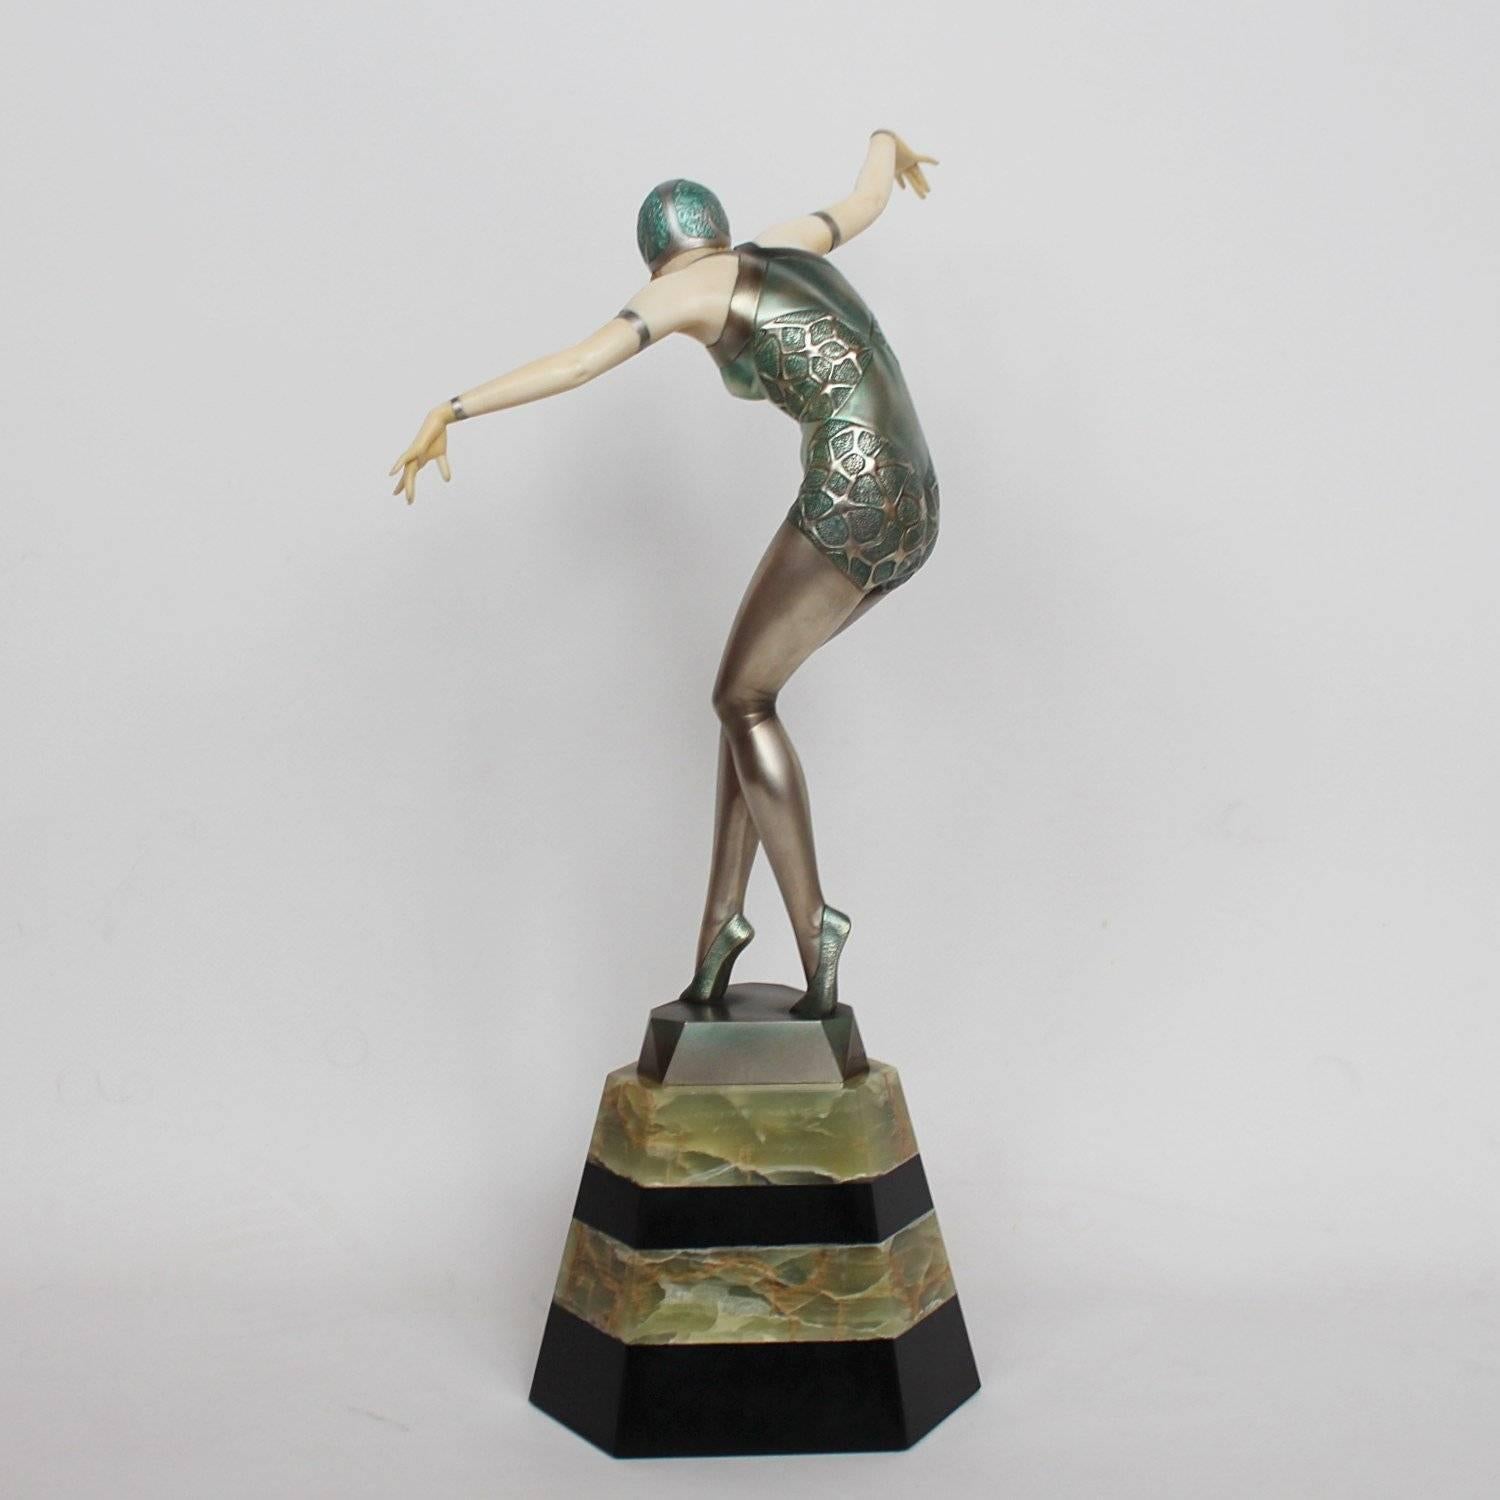 Cabaret dancer, a rare Art Deco, cold painted bronze and ivory figure. Shows a beautiful young showgirl in stylised dance pose. Set over a bi-coloured green onyx and black marble plinth. Excellent original condition.

Literature: Alberto Shayo,